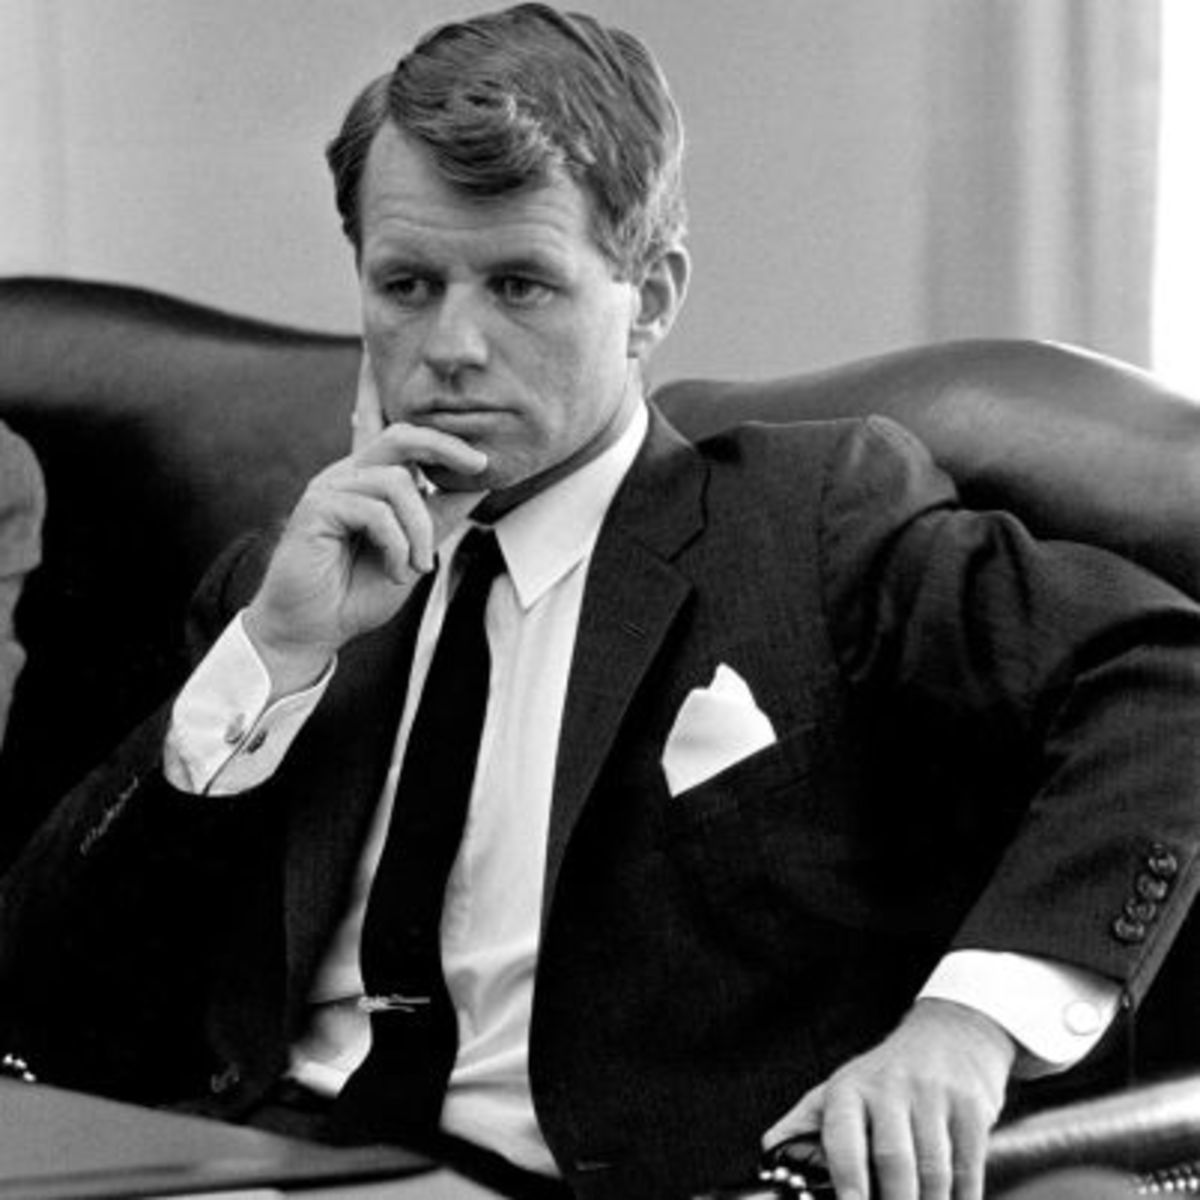 A former Attorney General and then-US senator and presidential candidate on June 6, 1968.